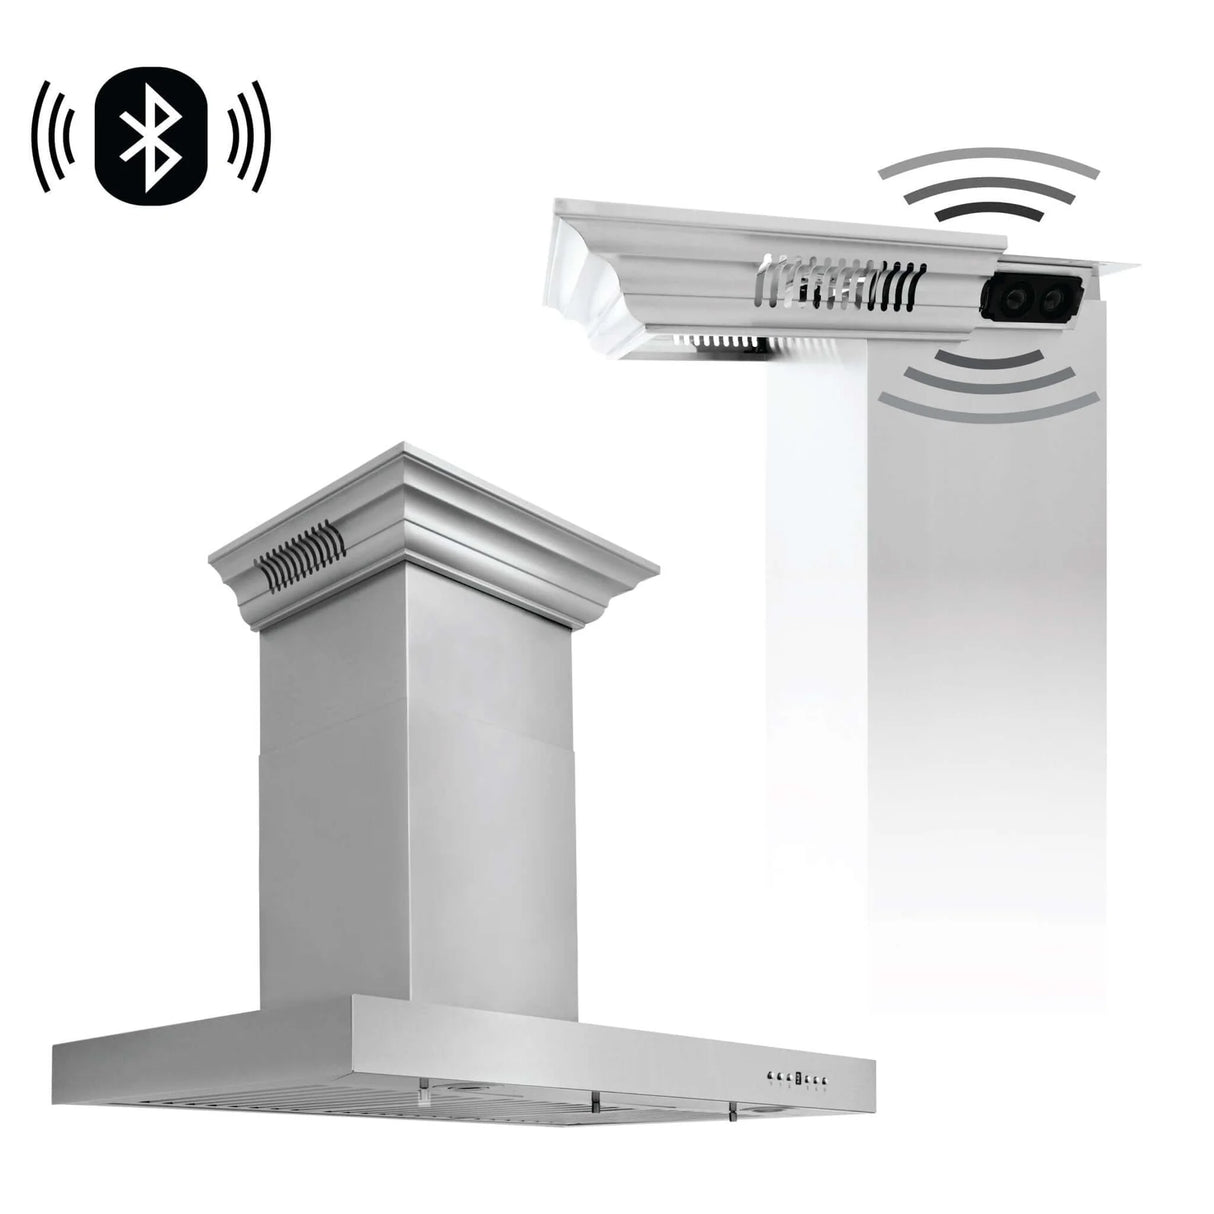 ZLINE 30" CrownSound™ Ducted Vent Wall Mount Range Hood in Stainless Steel with Built-in Bluetooth Speakers